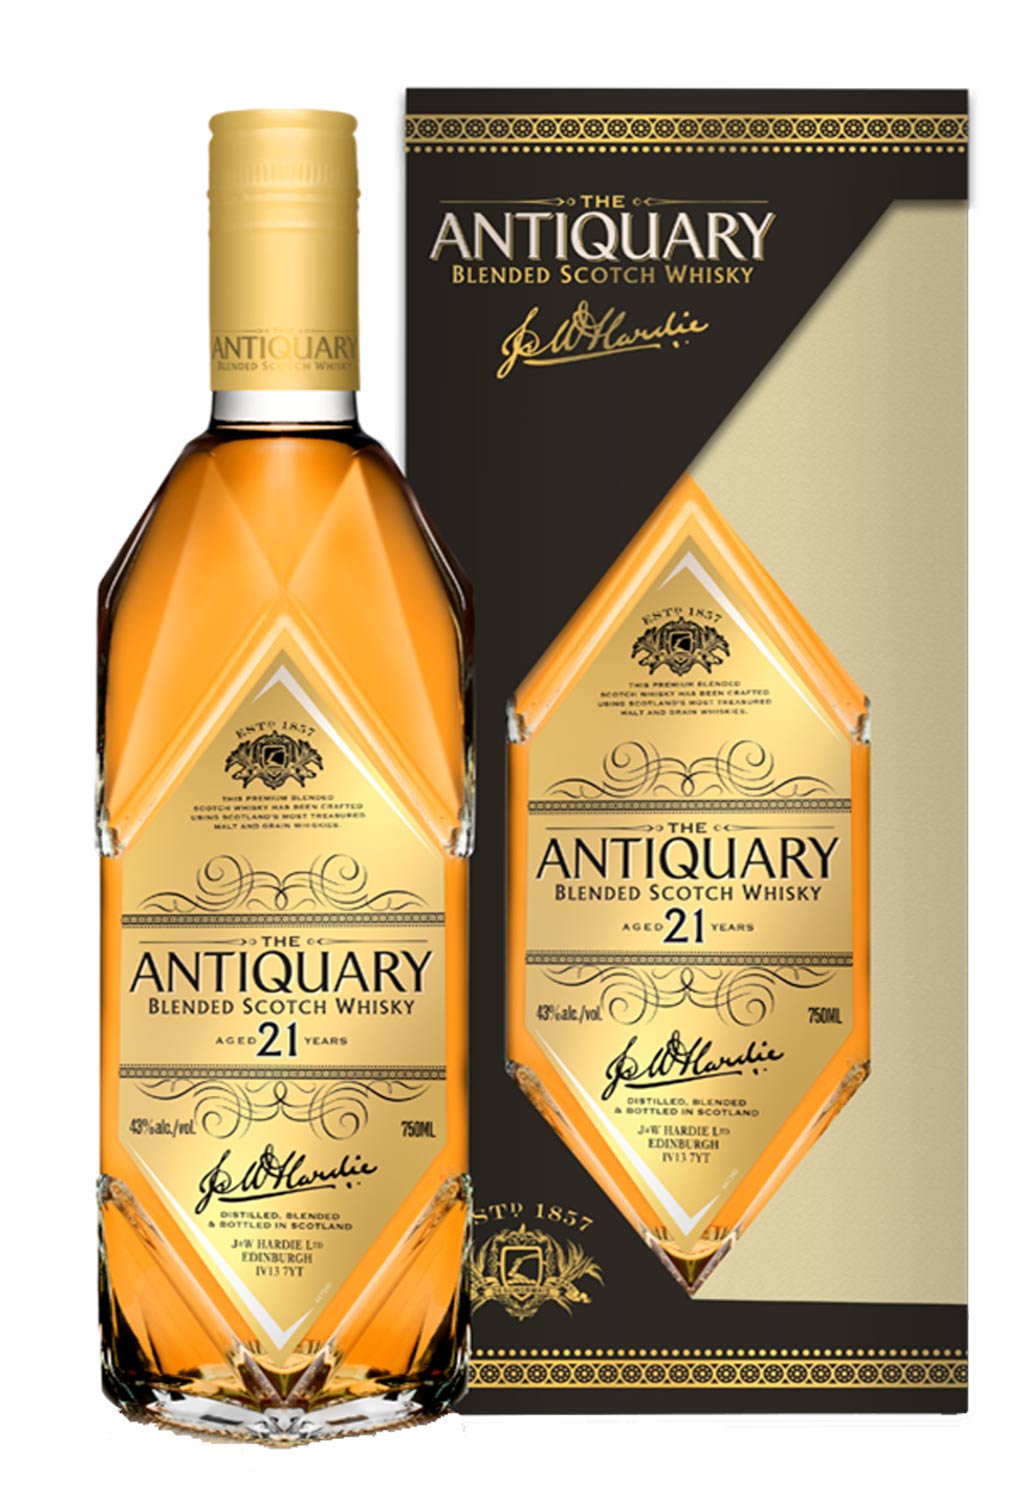 The Antiquary Blended Scotch Whisky 21 Years Old